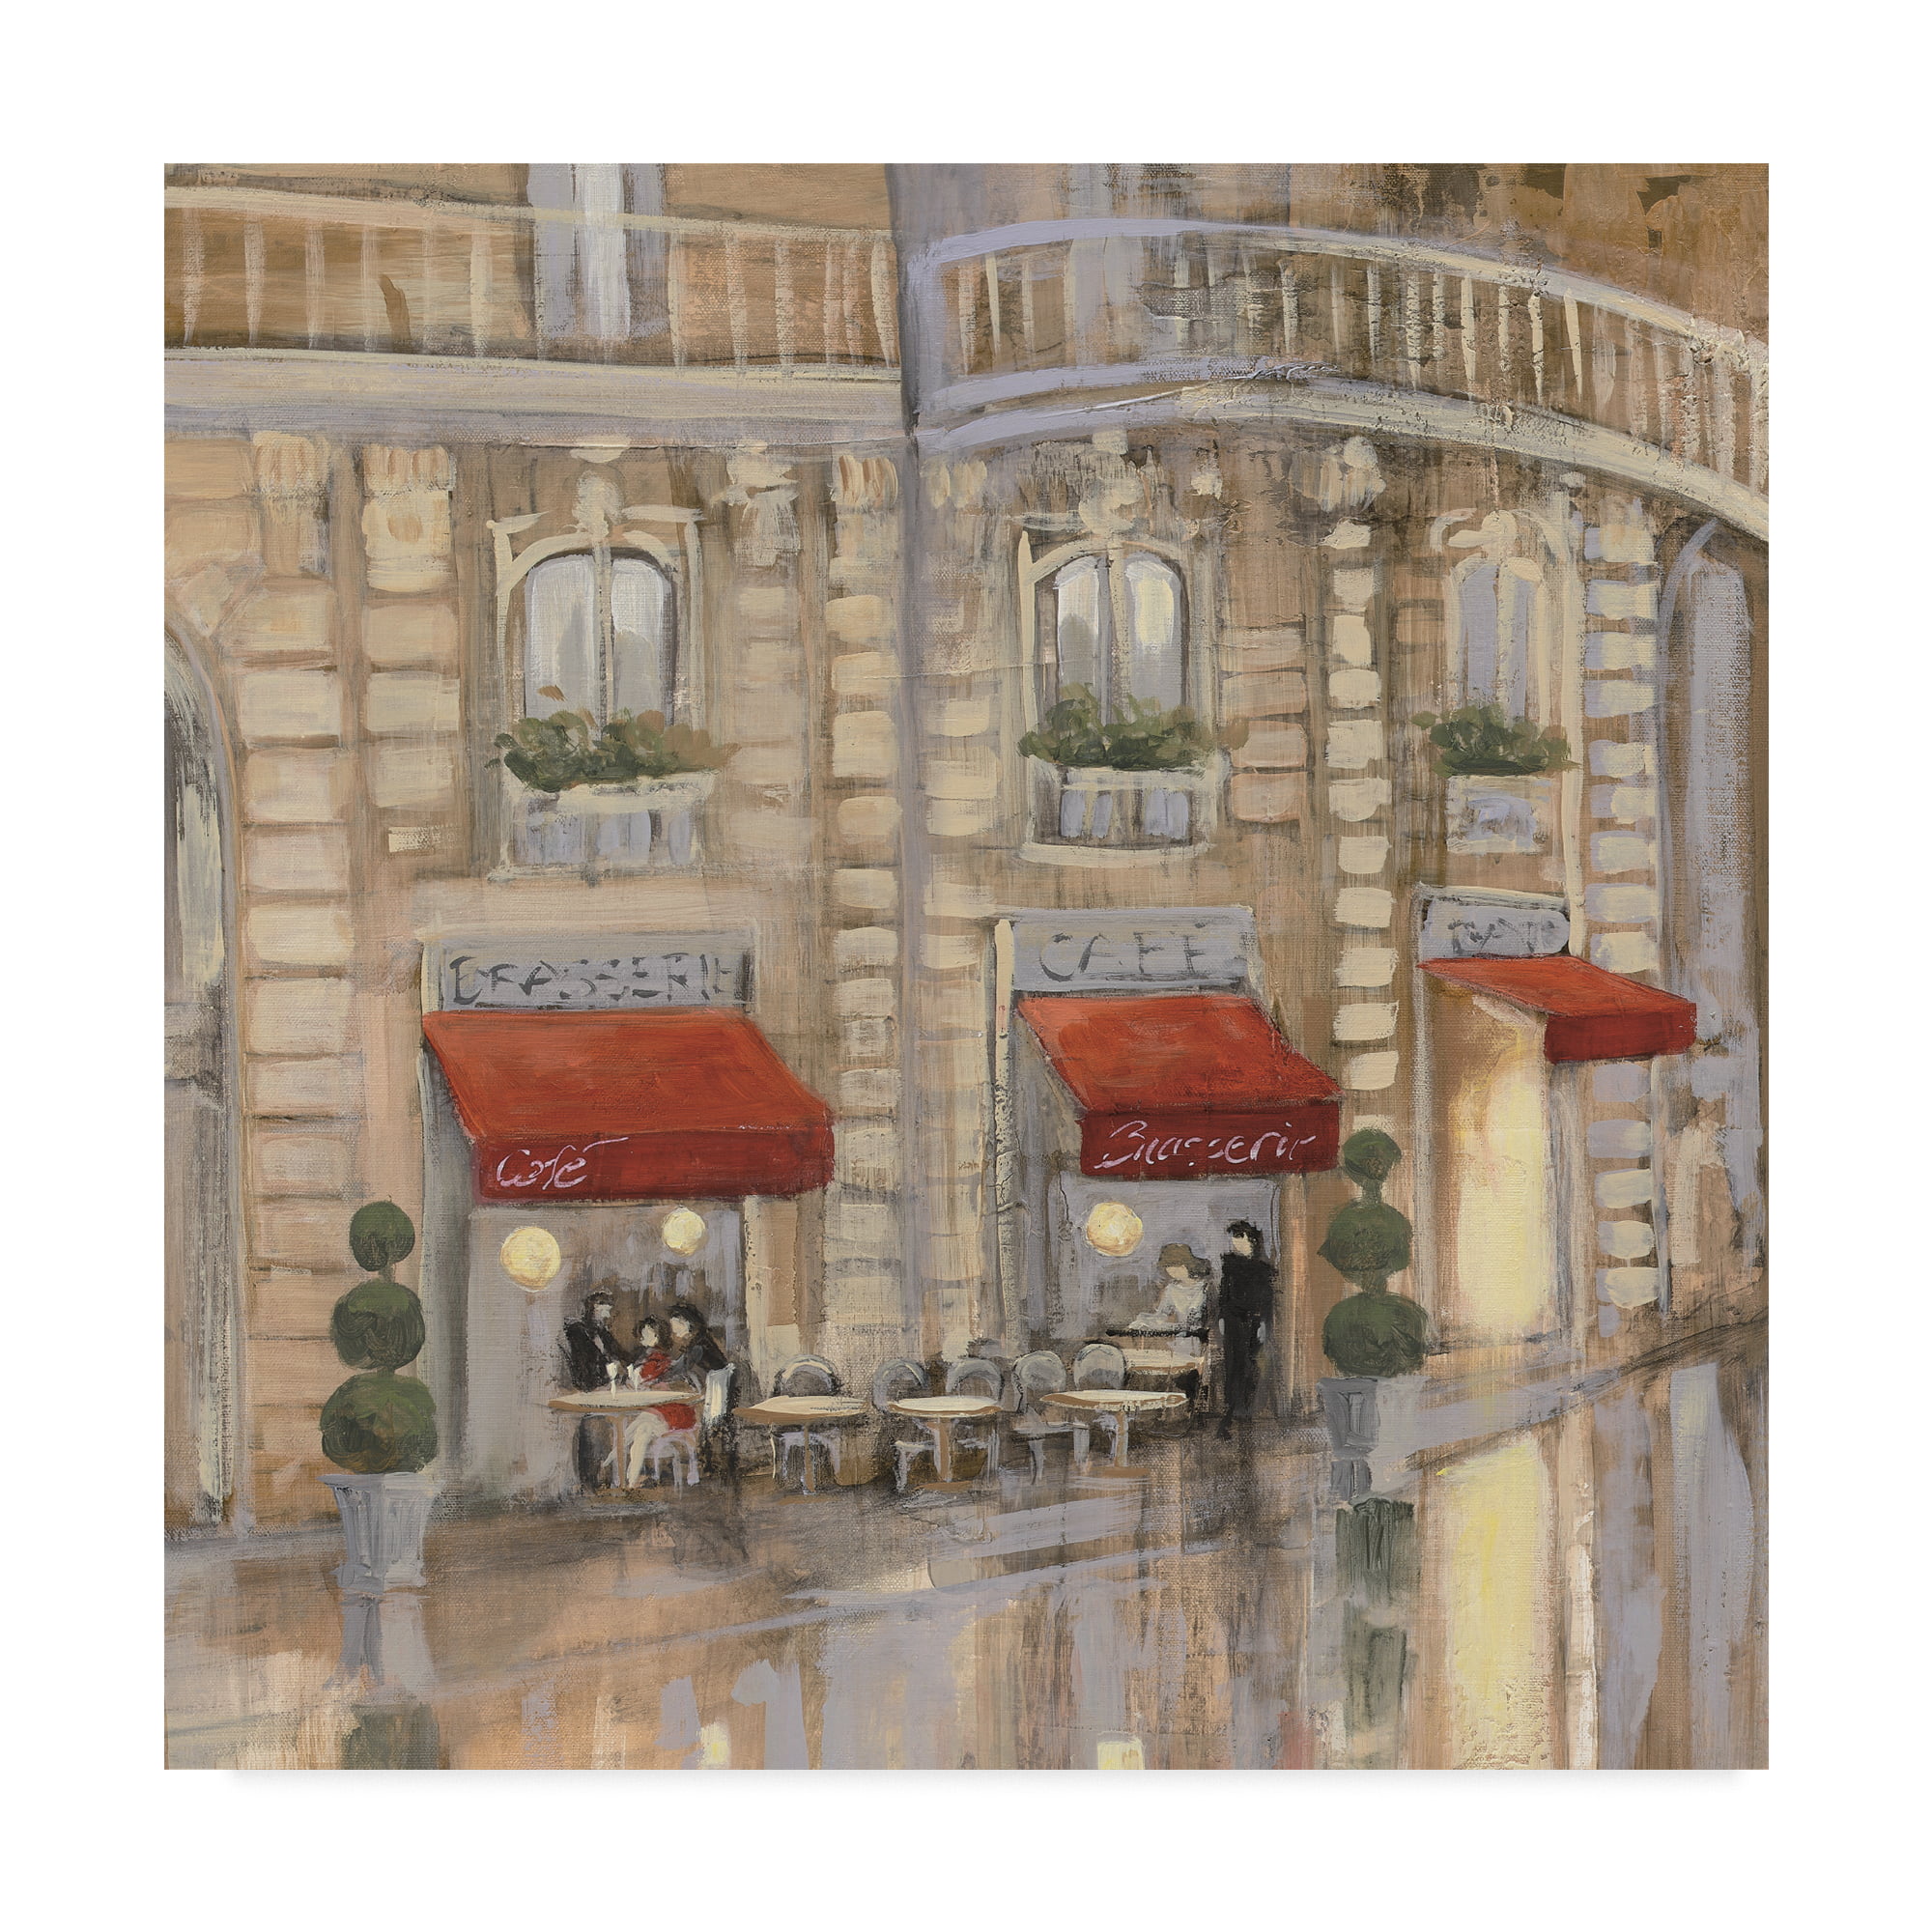 Touring Paris Couple II Giclee Stretched Canvas Artwork 18 x 18 Global Gallery Julia Purinton